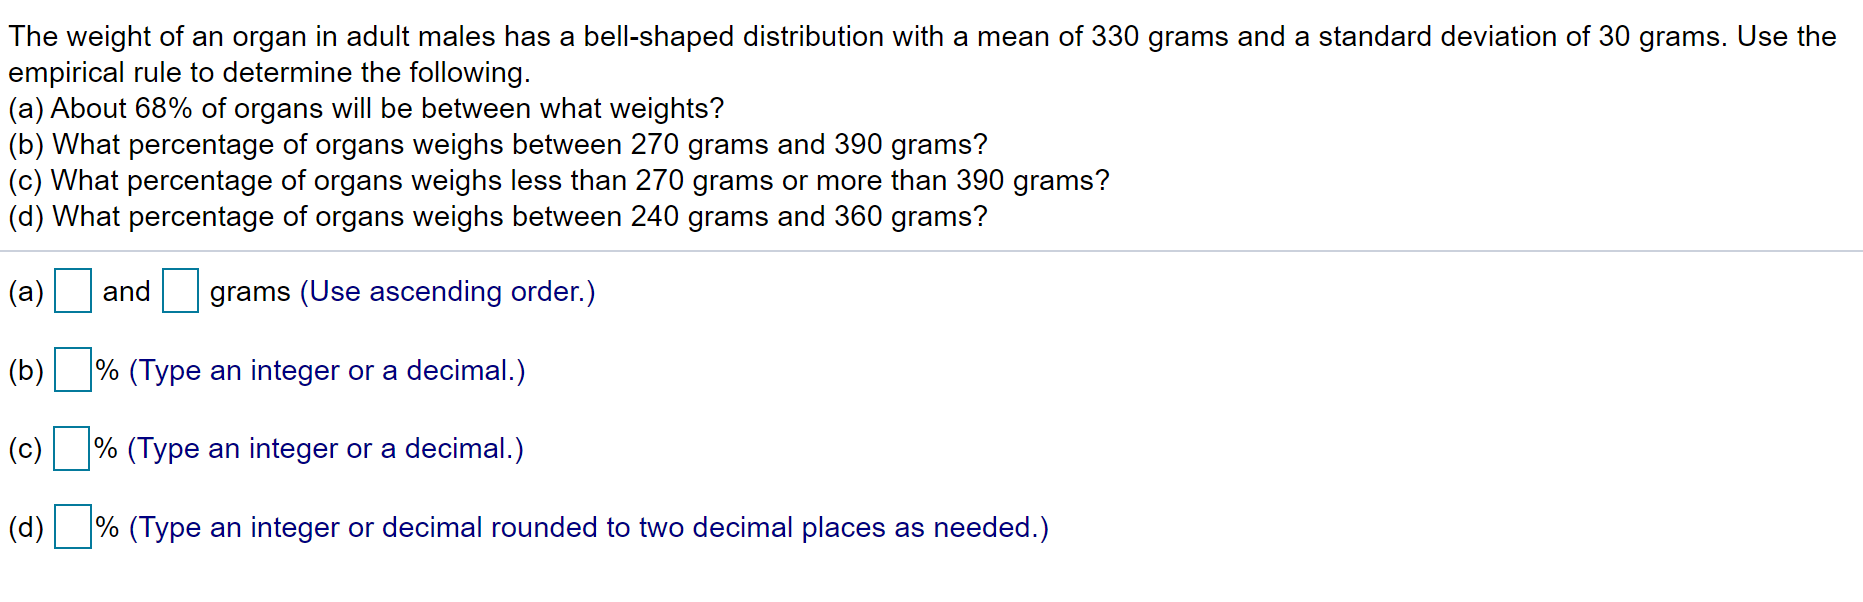 The weight of an organ in adult males has a bell-shaped distribution with a mean of 330 grams and a standard deviation of 30 grams. Use the
empirical rule to determine the following.
(a) About 68% of organs will be between what weights?
(b) What percentage of organs weighs between 270 grams and 390 grams?
(c) What percentage of organs weighs less than 270 grams or more than 390 grams?
(d) What percentage of organs weighs between 240 grams and 360 grams?
